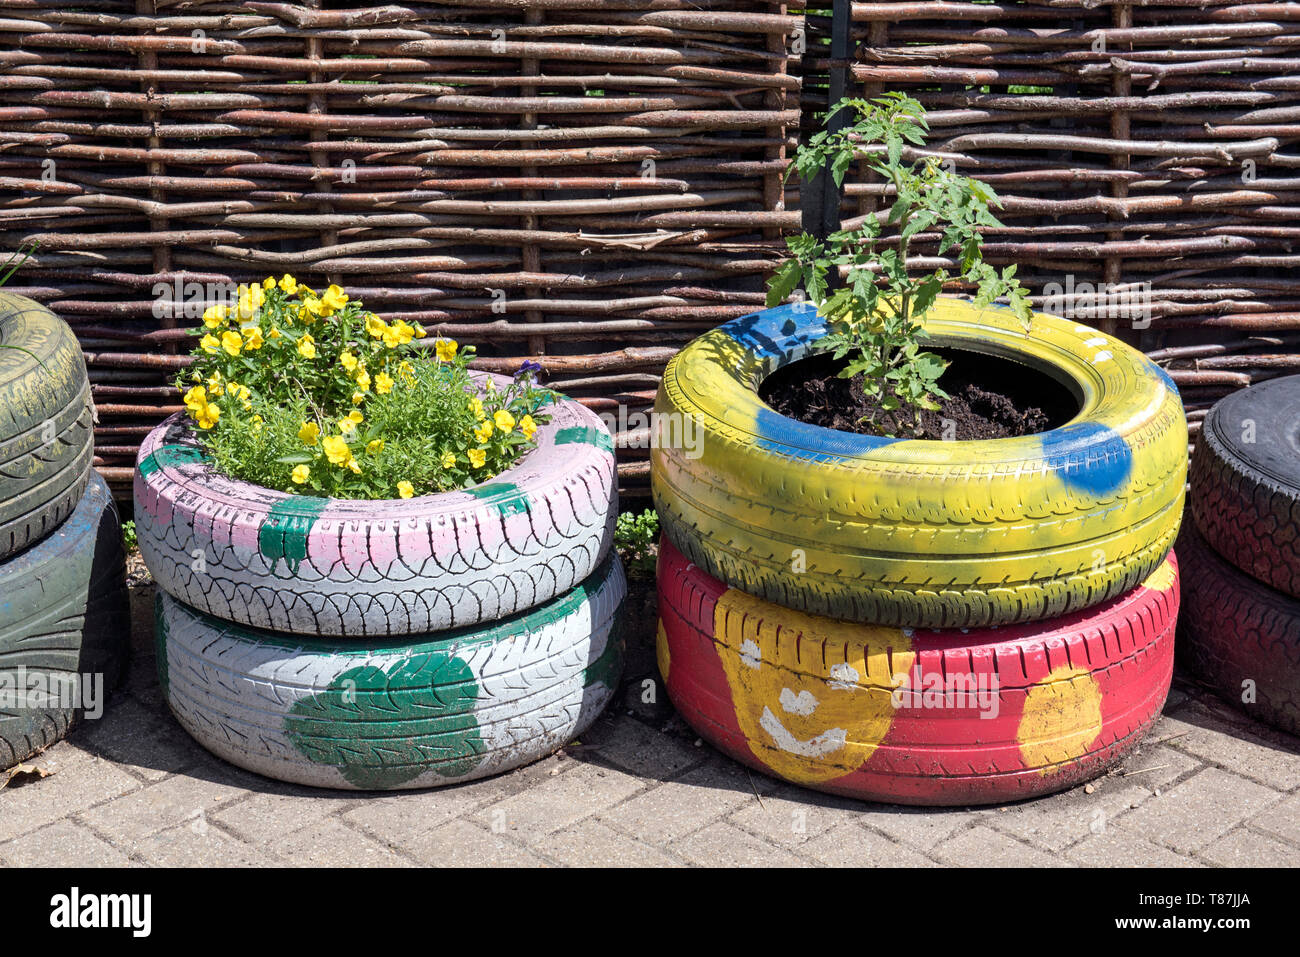 Colourfull tyres used as planters for plants and vegetables Stock Photo